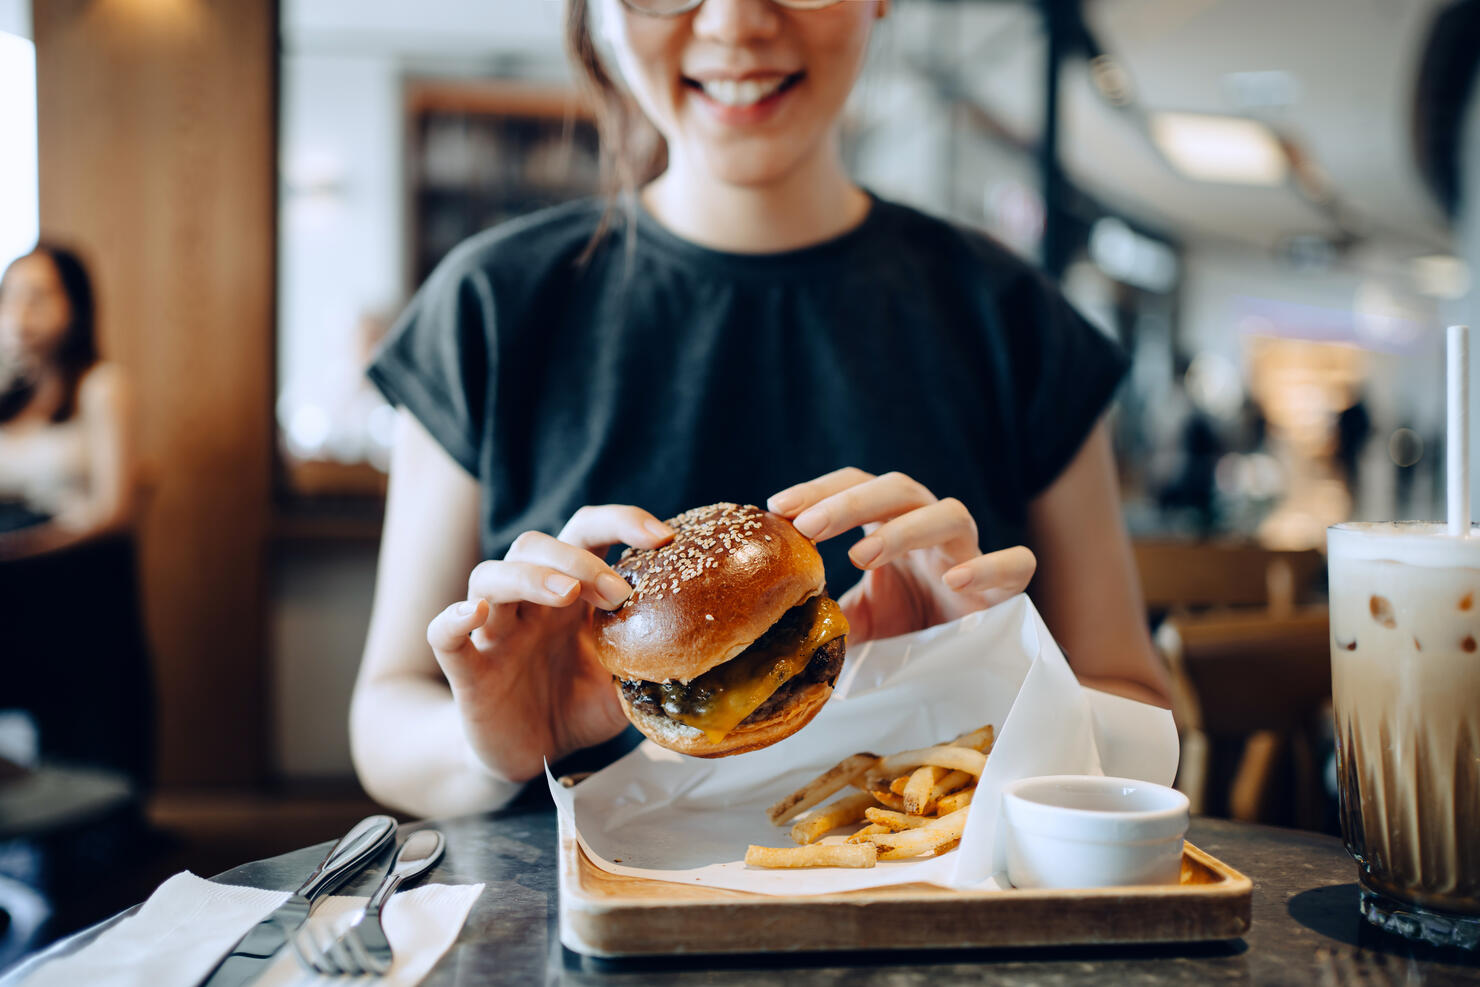 Smiling young Asian woman enjoying freshly made delicious burger with fries and a glass of iced coffee in a cafe